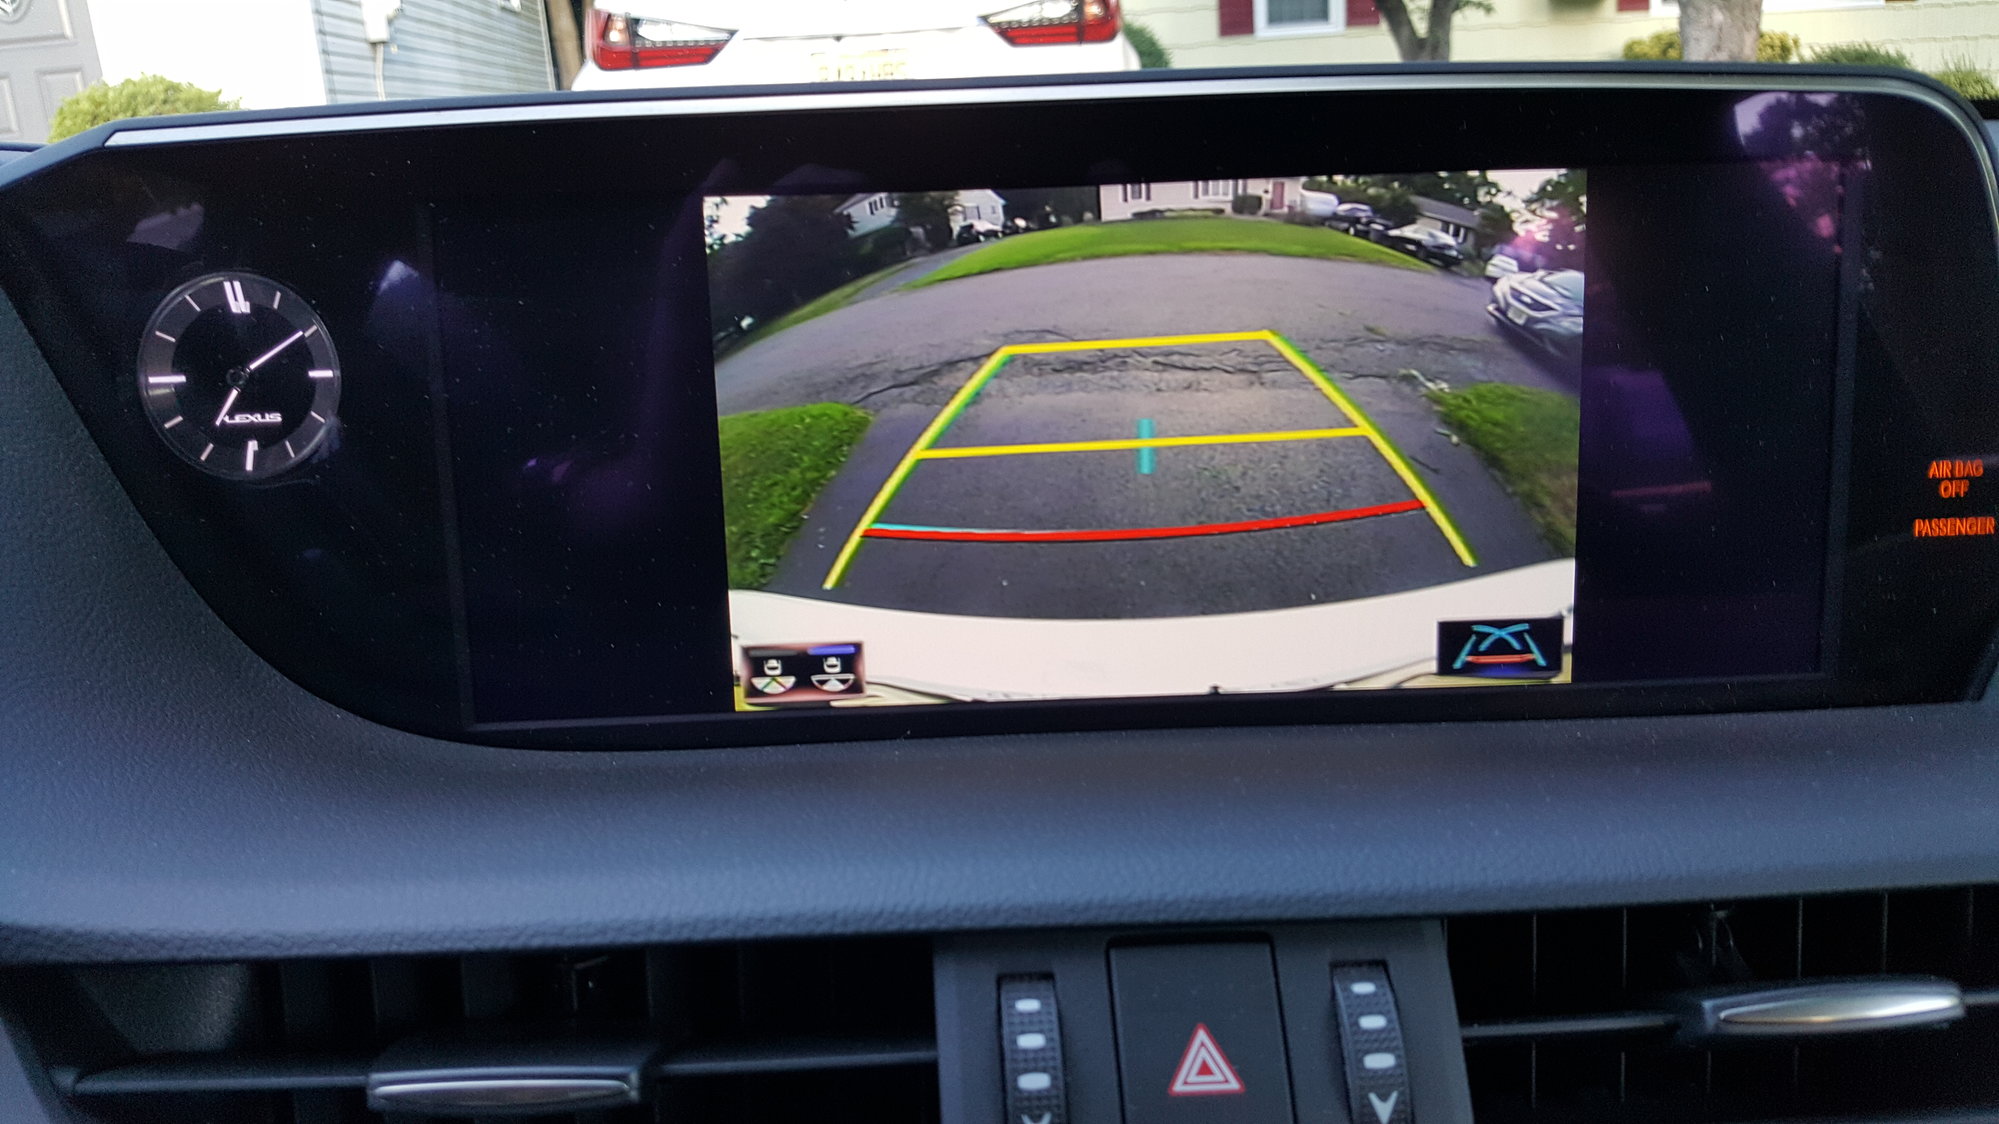 2020 ES 350 Backup camera blurry / Out of Focus! - Page 2 - ClubLexus ...